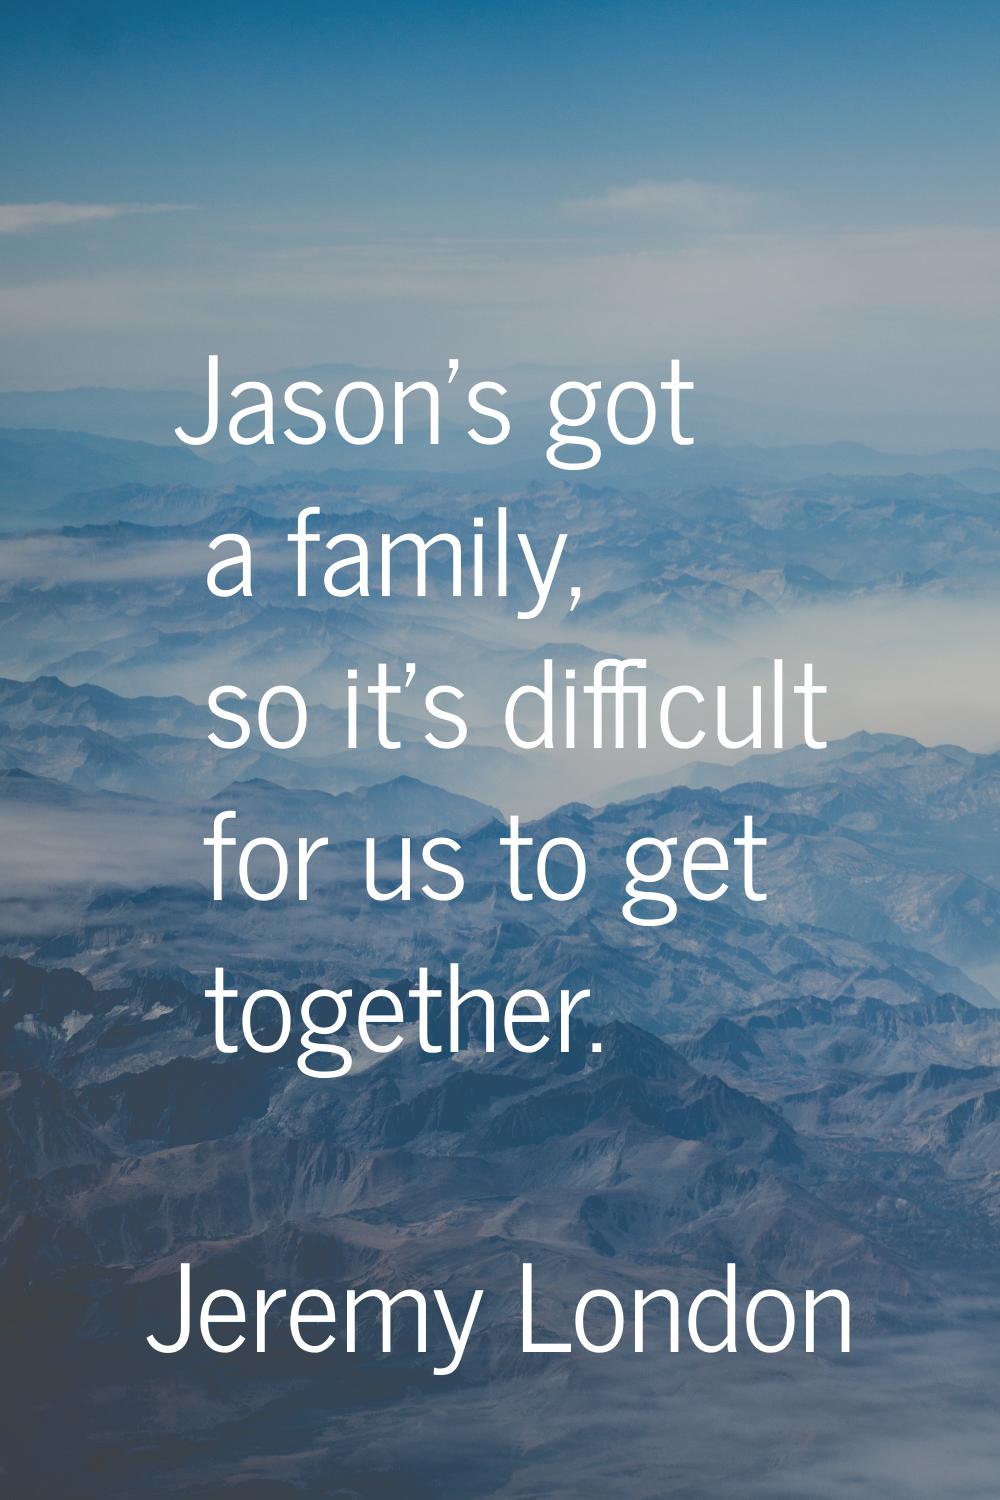 Jason's got a family, so it's difficult for us to get together.